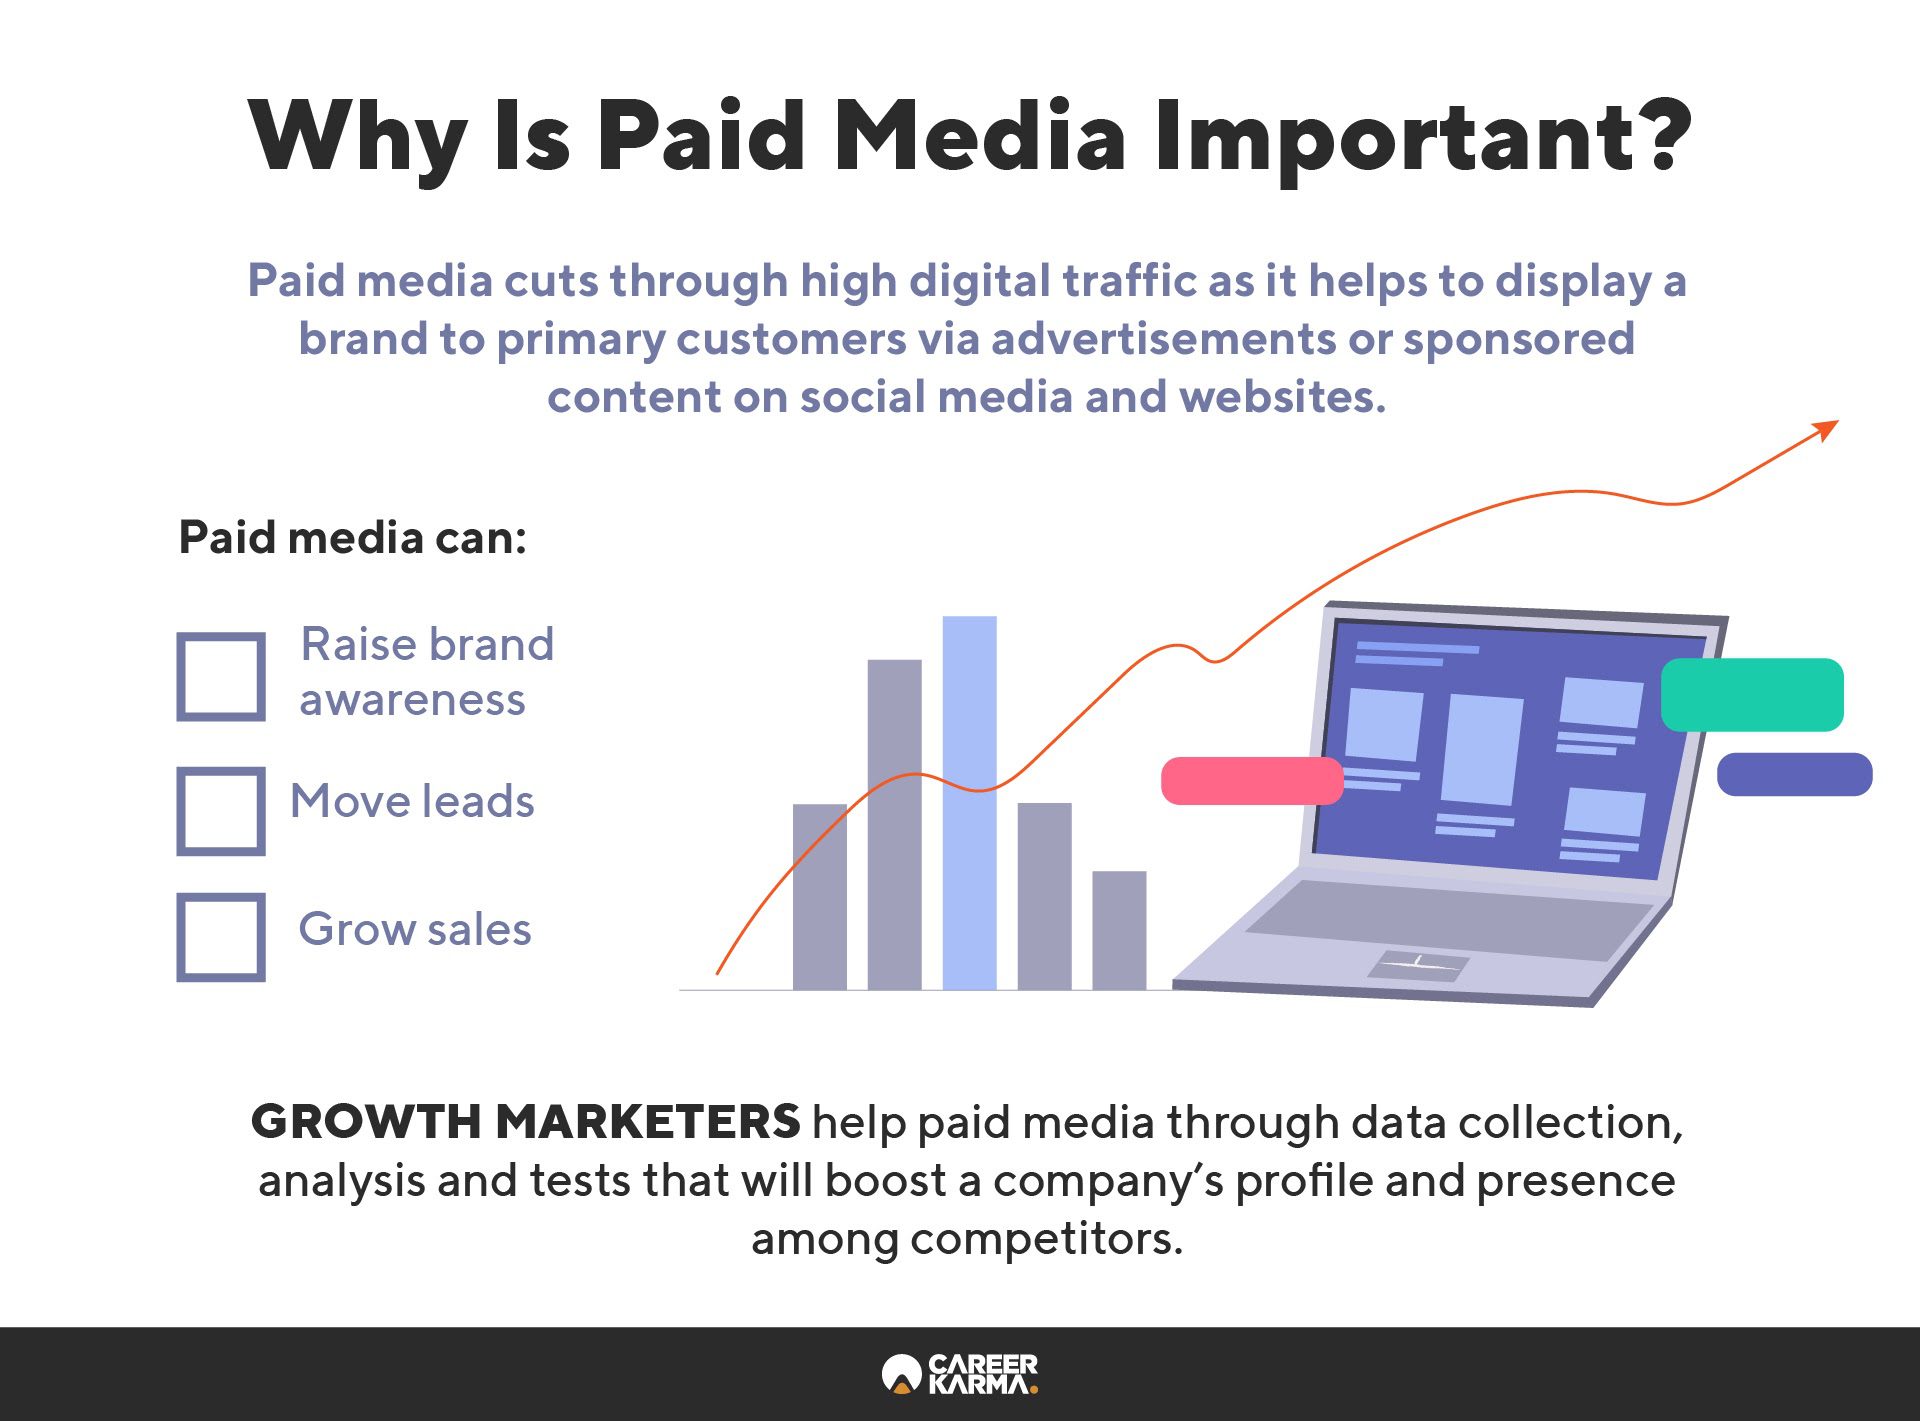 An infographic covering the benefits of paid media to a business